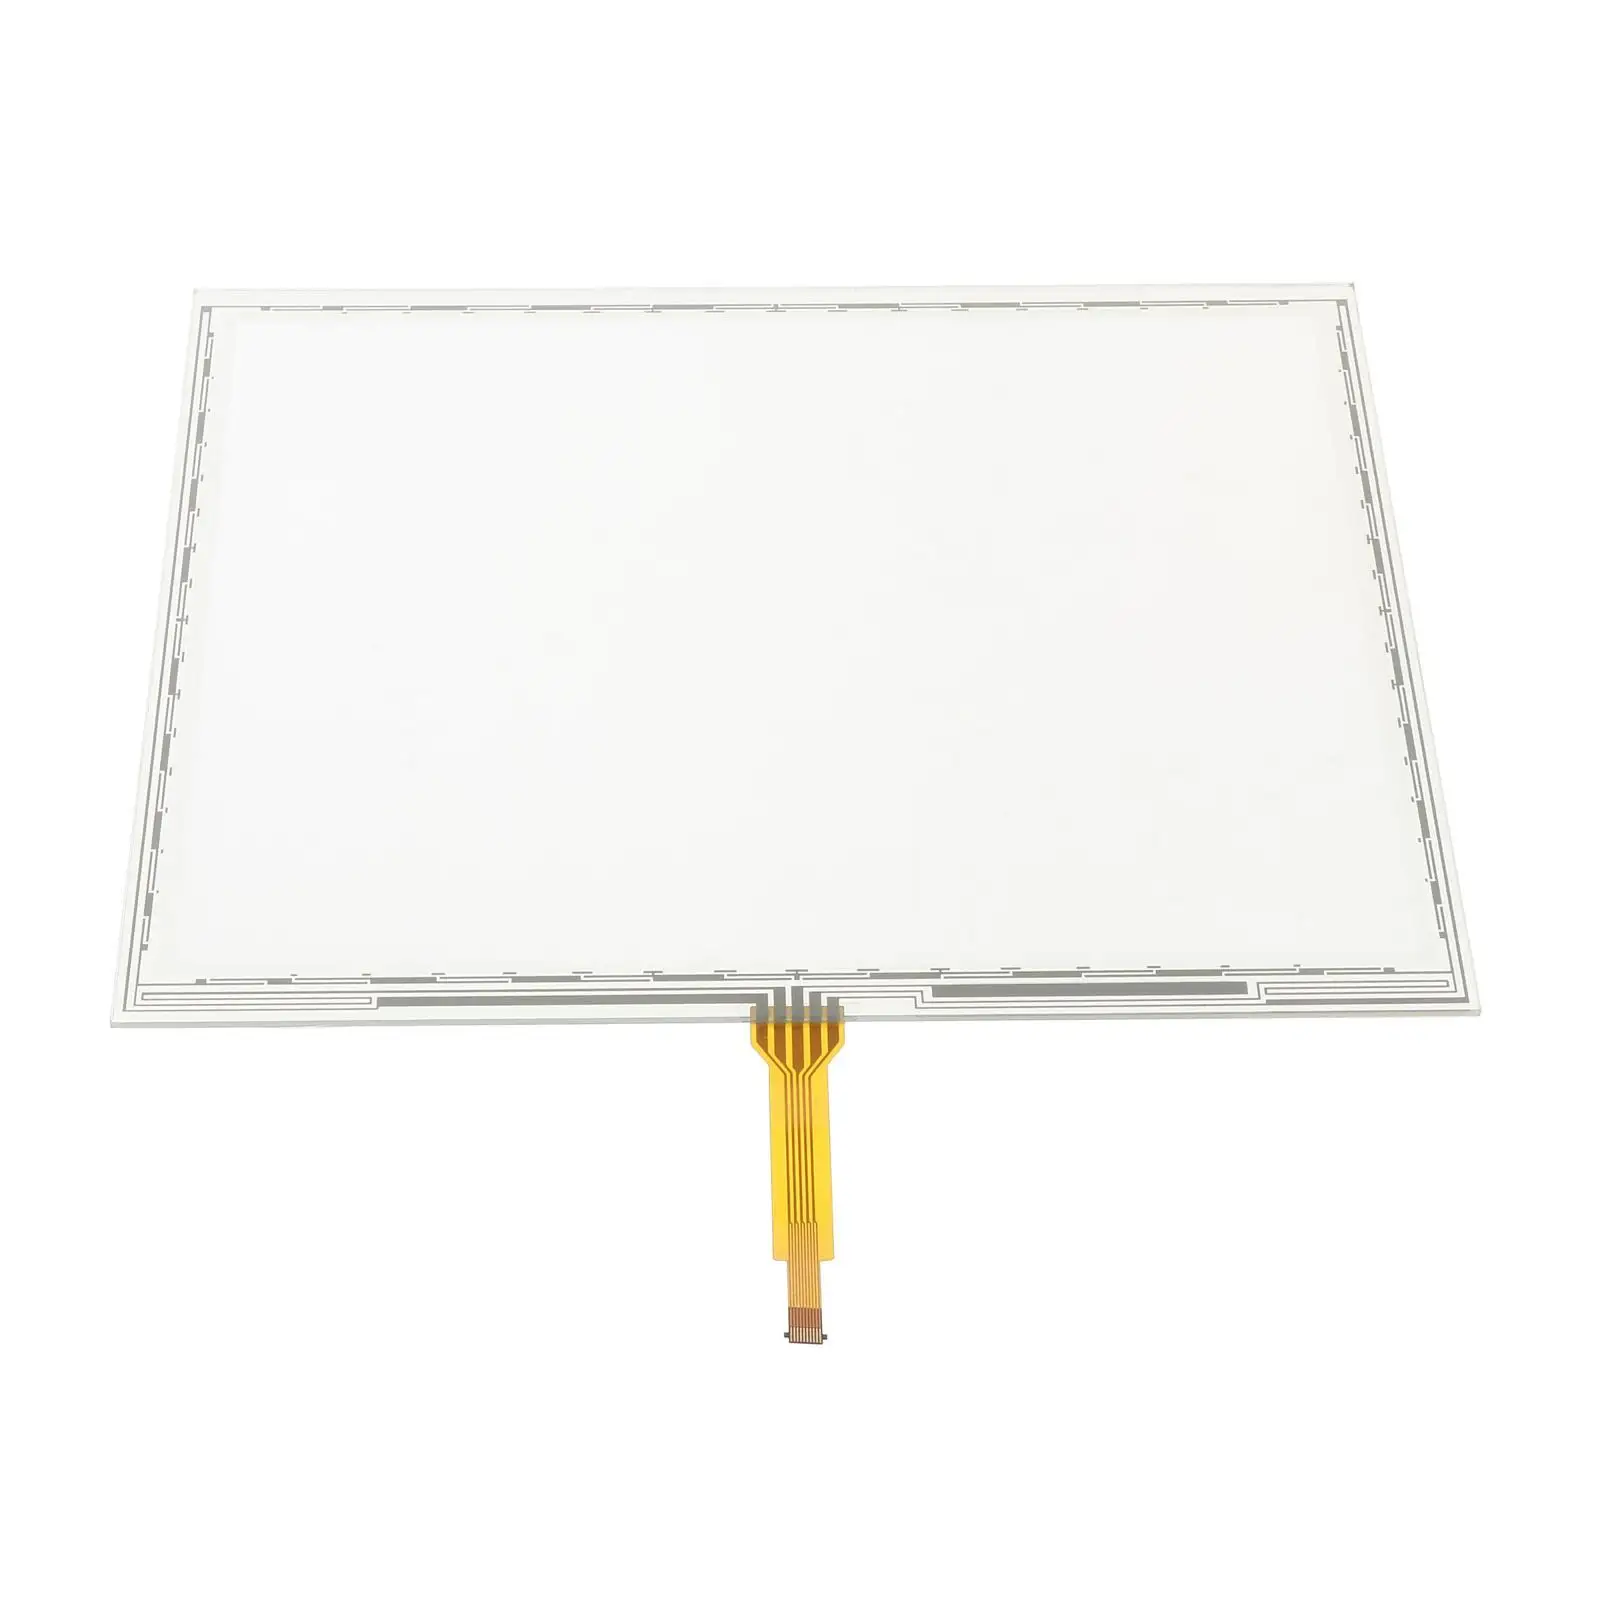 Touch Screen Panel Fpc-863Ne LCD Display Panel 9.09inchx7.17inch for 4640 Direct Installation Replacement Parts Durable